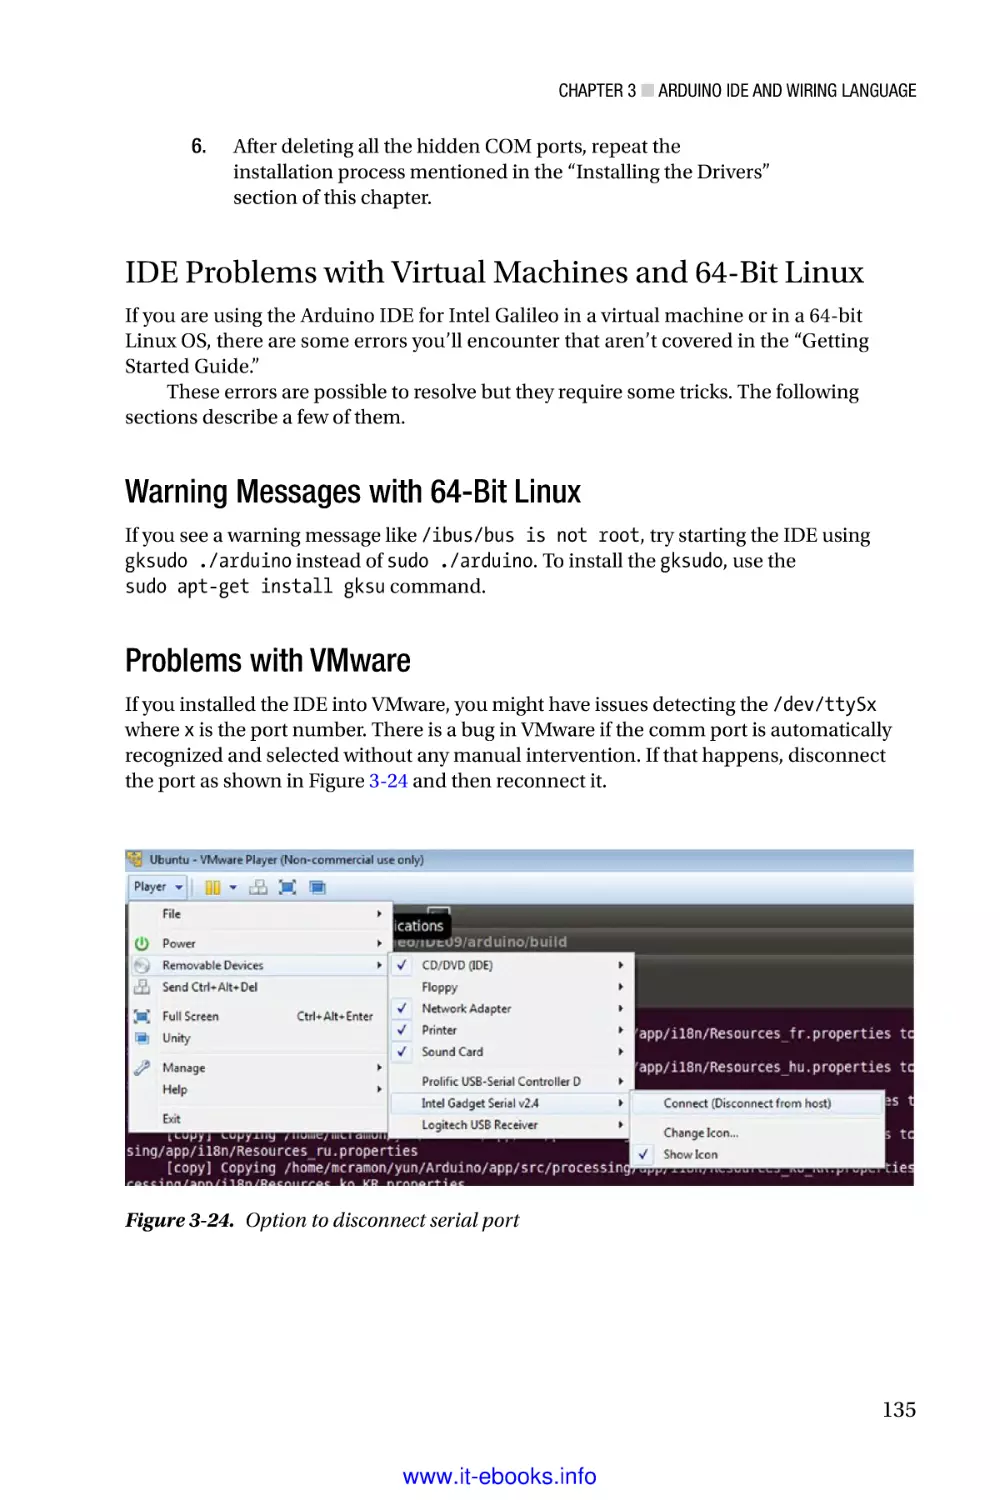 IDE Problems with Virtual Machines and 64-Bit Linux
Warning Messages with 64-Bit Linux
Problems with VMware